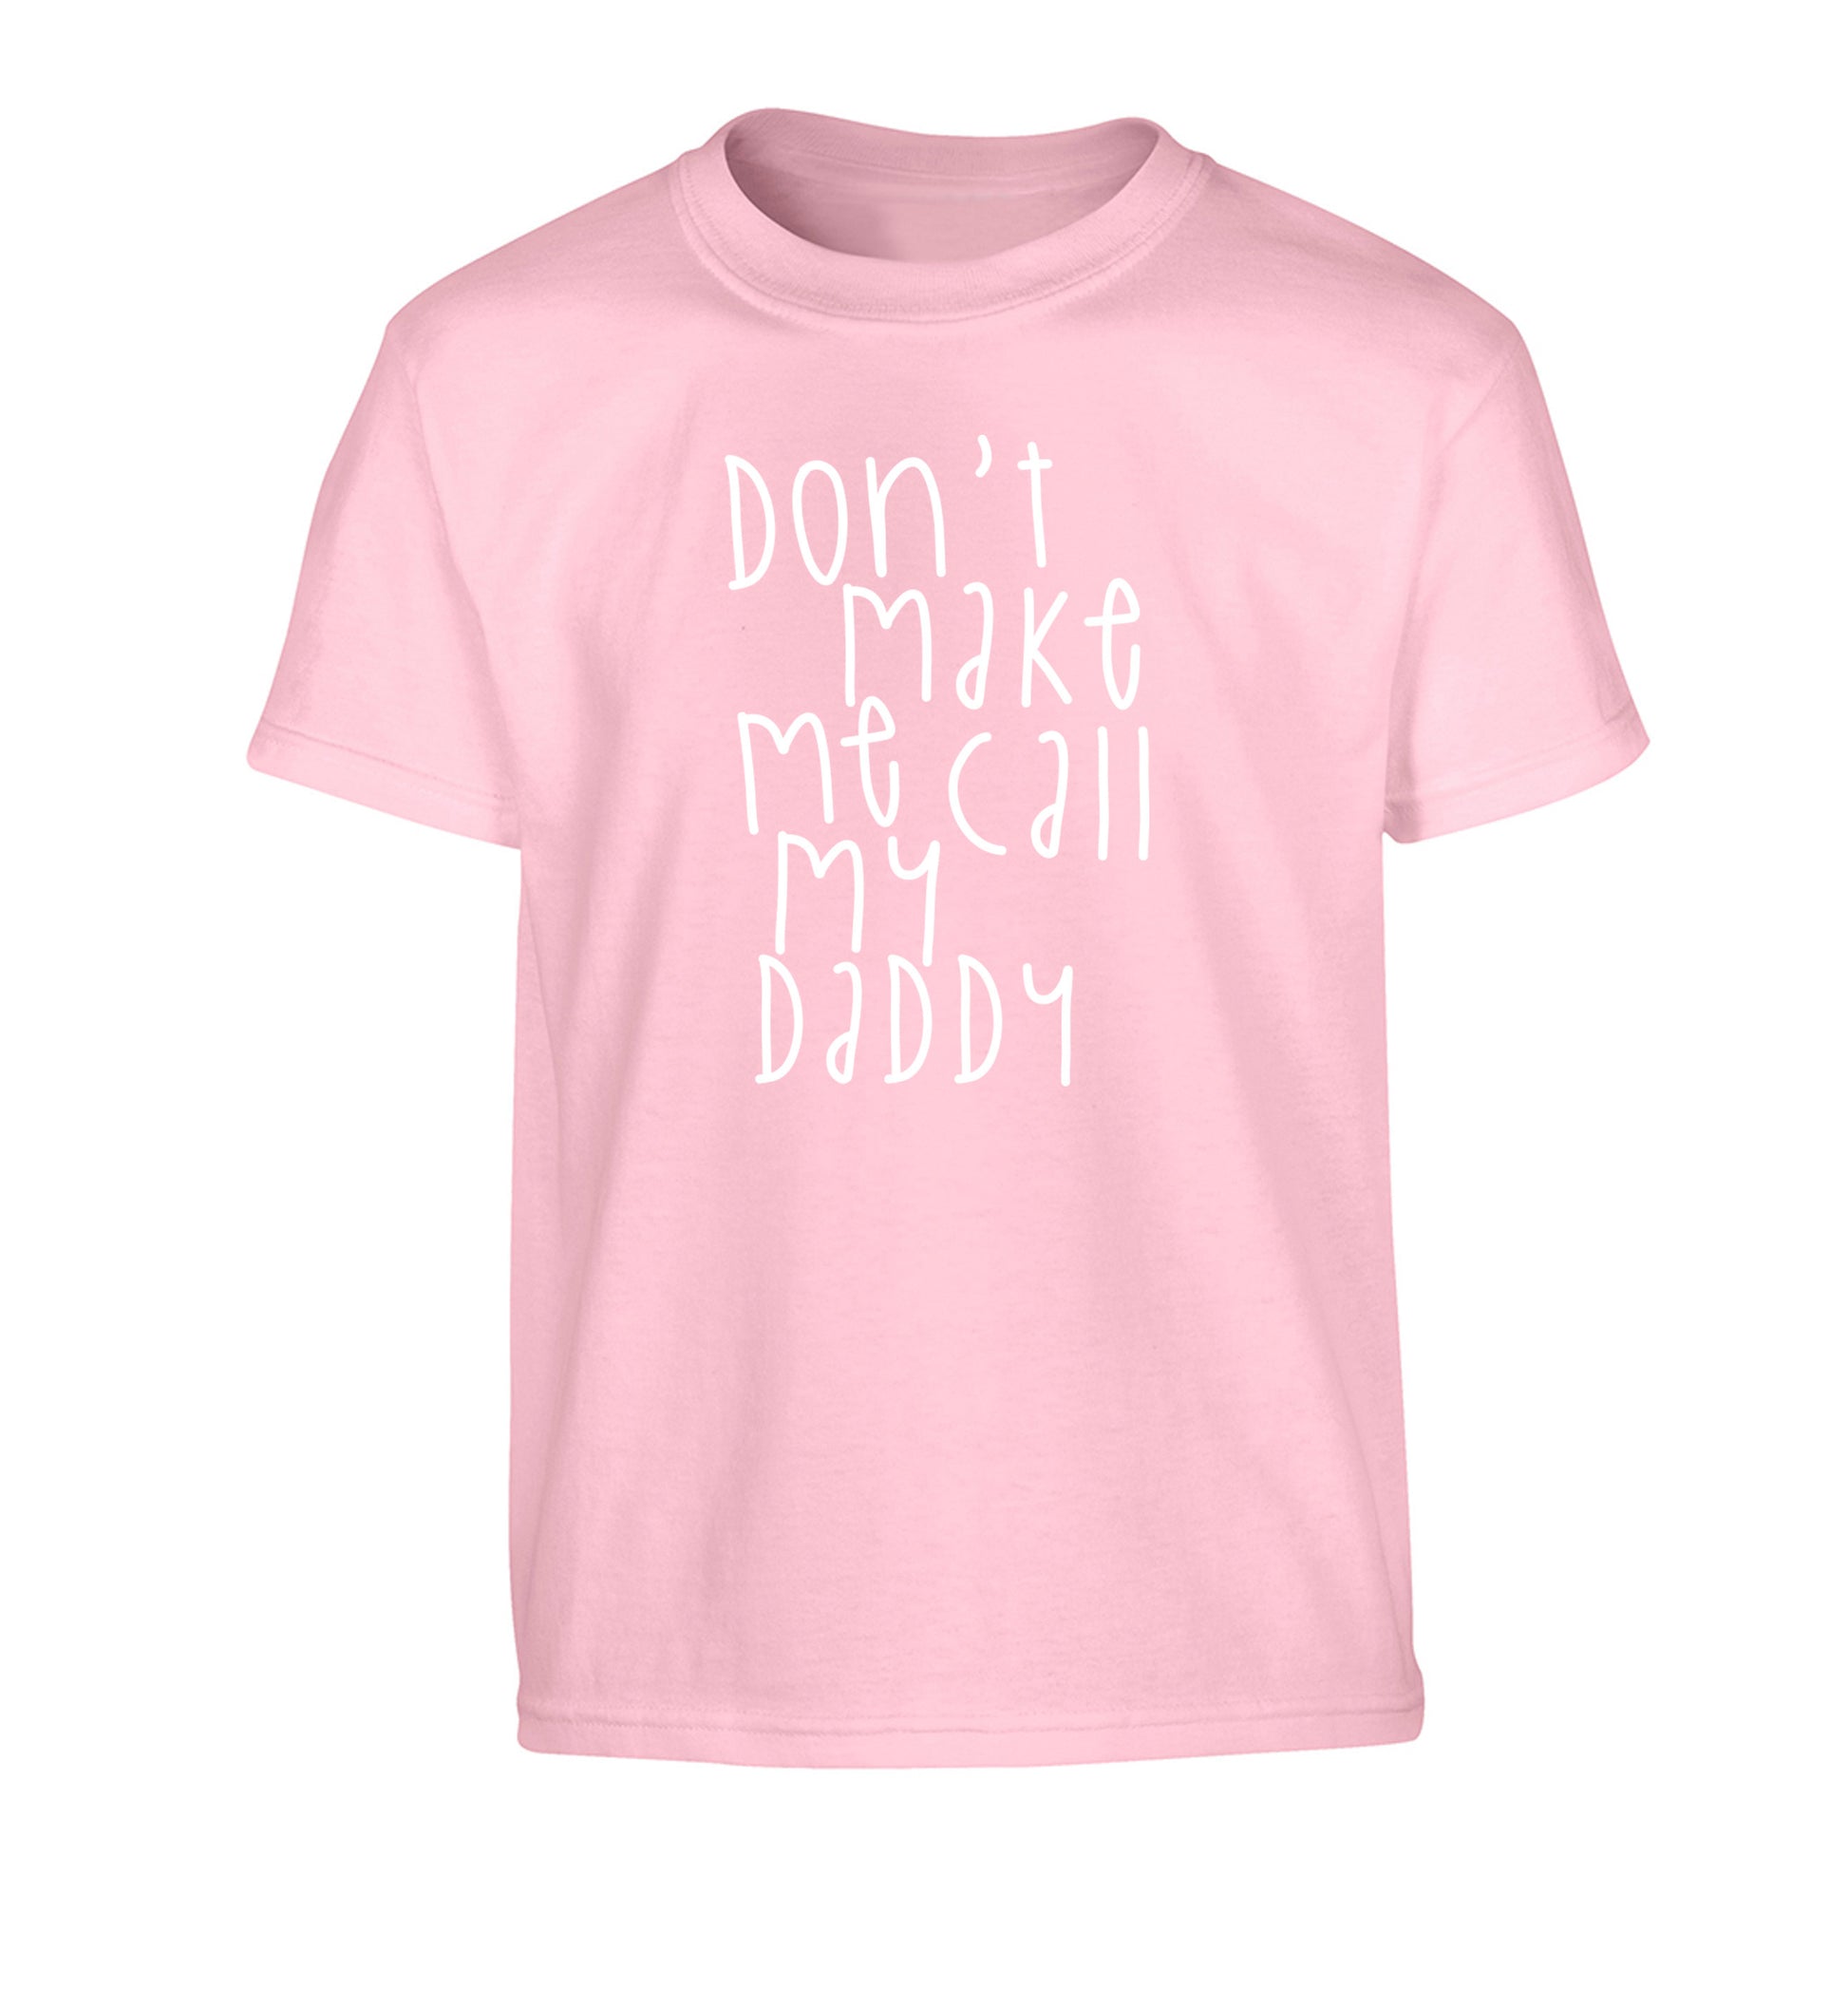 Don't make me call my daddy Children's light pink Tshirt 12-14 Years